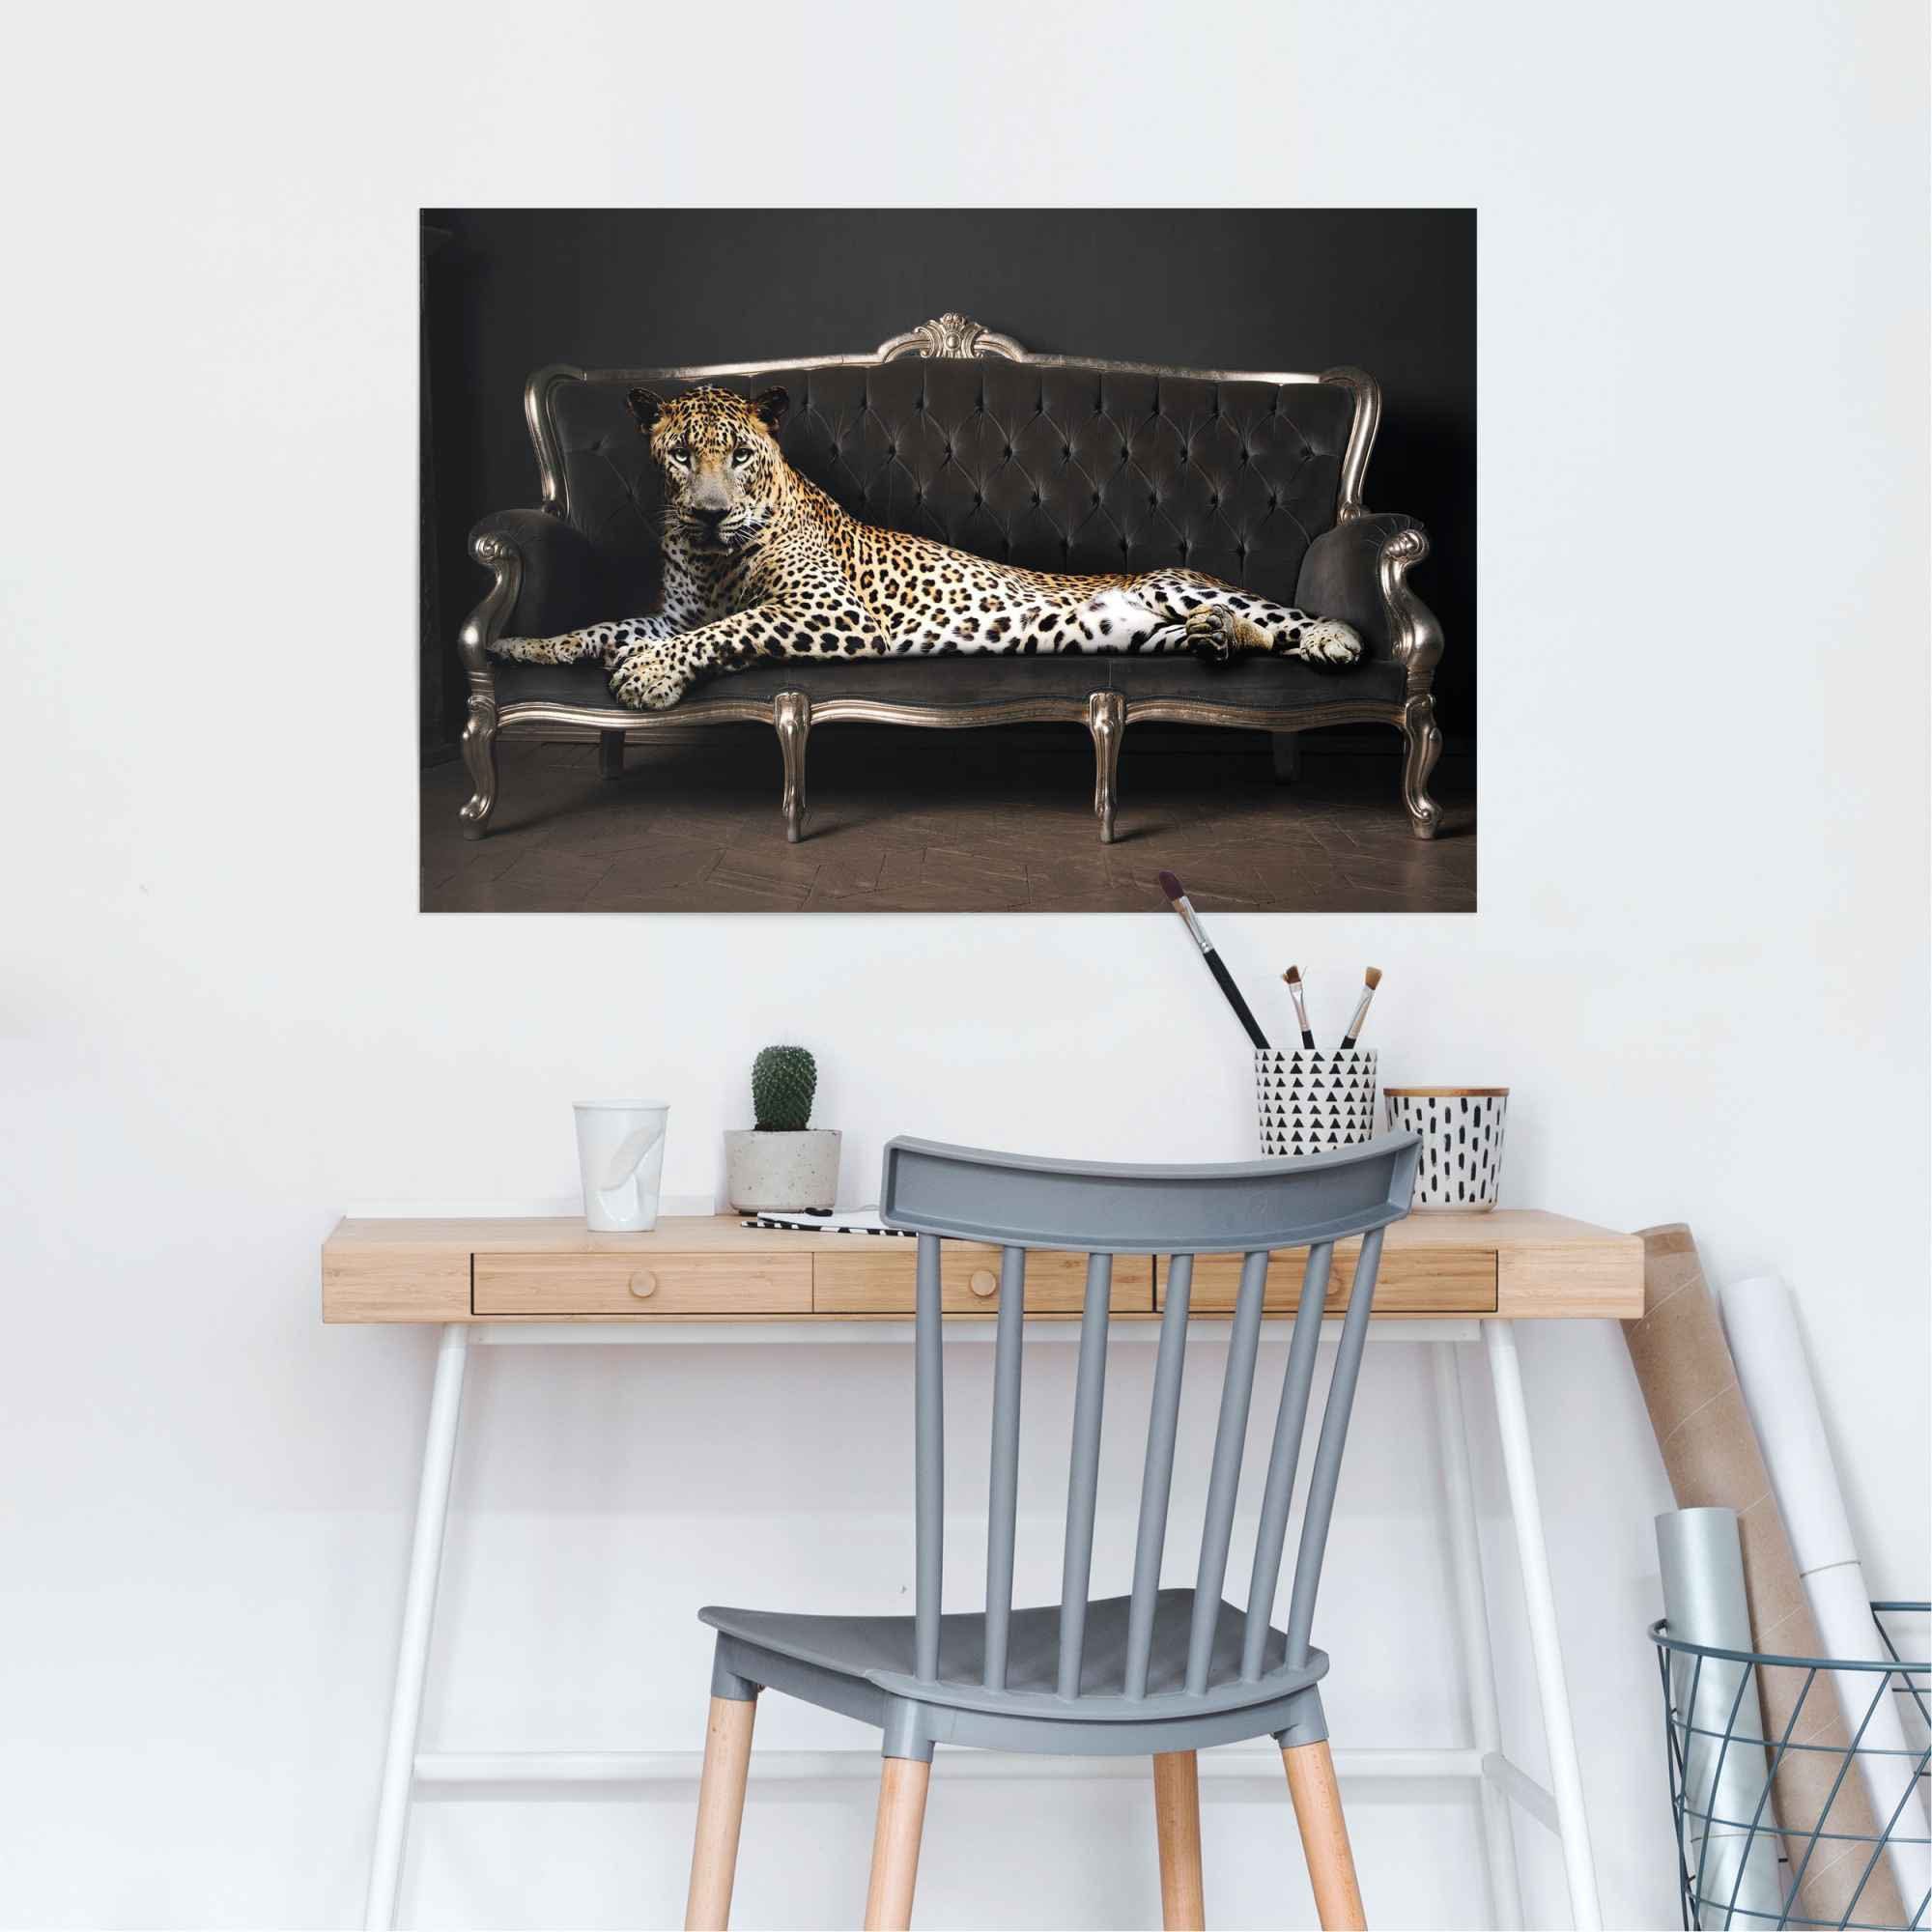 - (1 Liegend Chic Relax, Leopard Reinders! - St) Luxus Panther Poster -